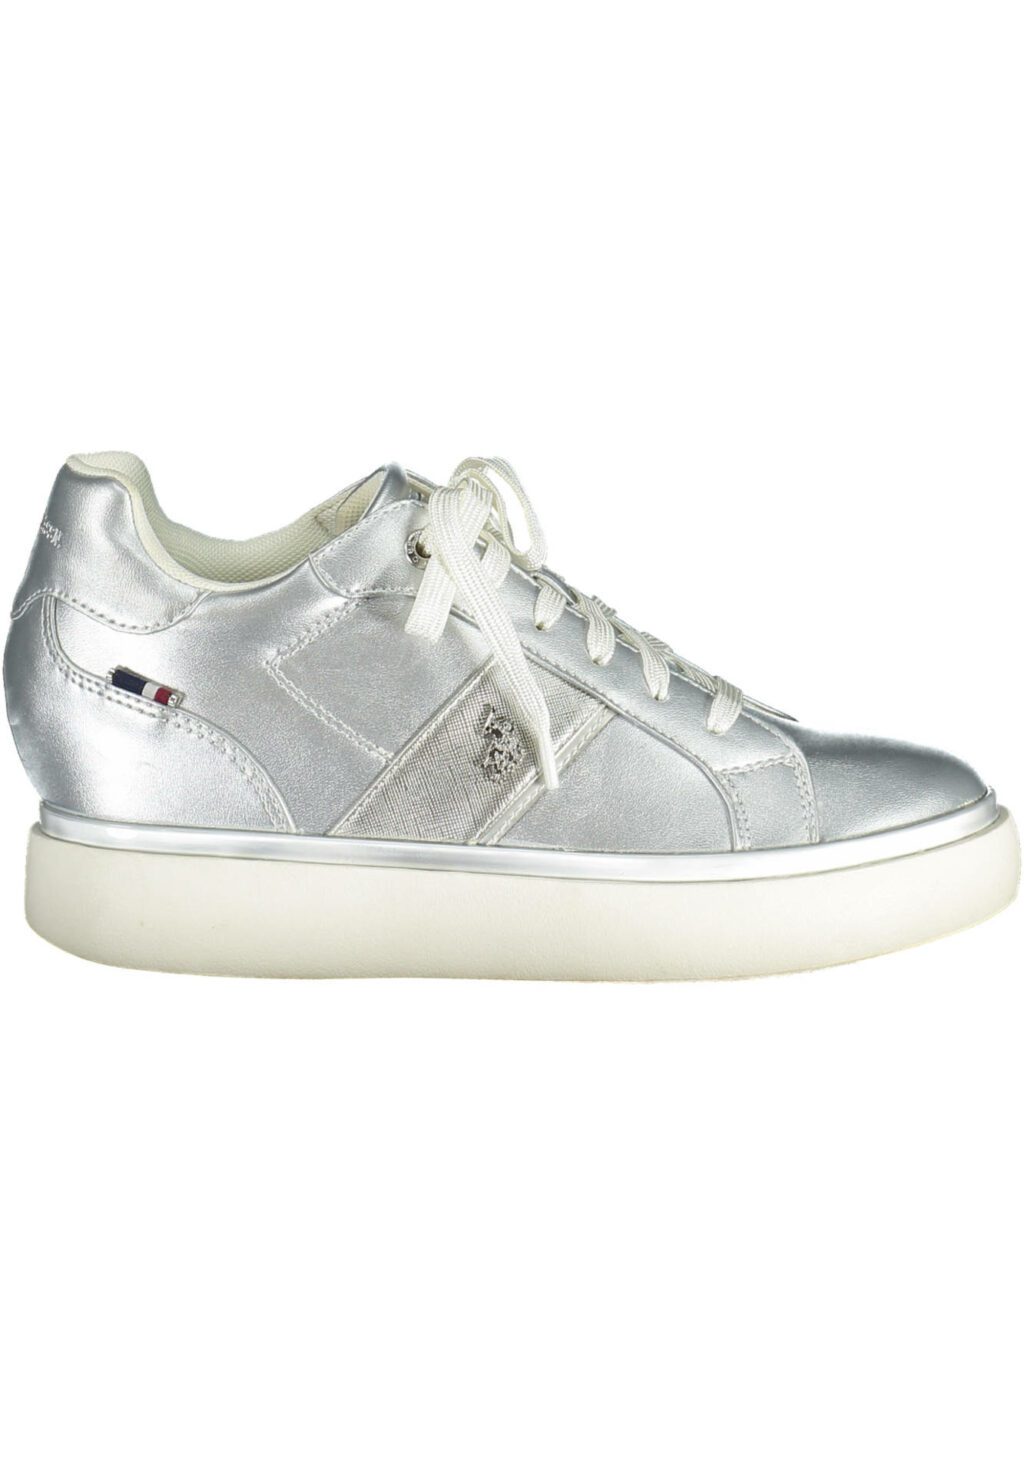 US POLO BEST PRICE SILVER WOMEN'S SPORTS SHOES ANGIE001WAY2_ARGENTO_SIL